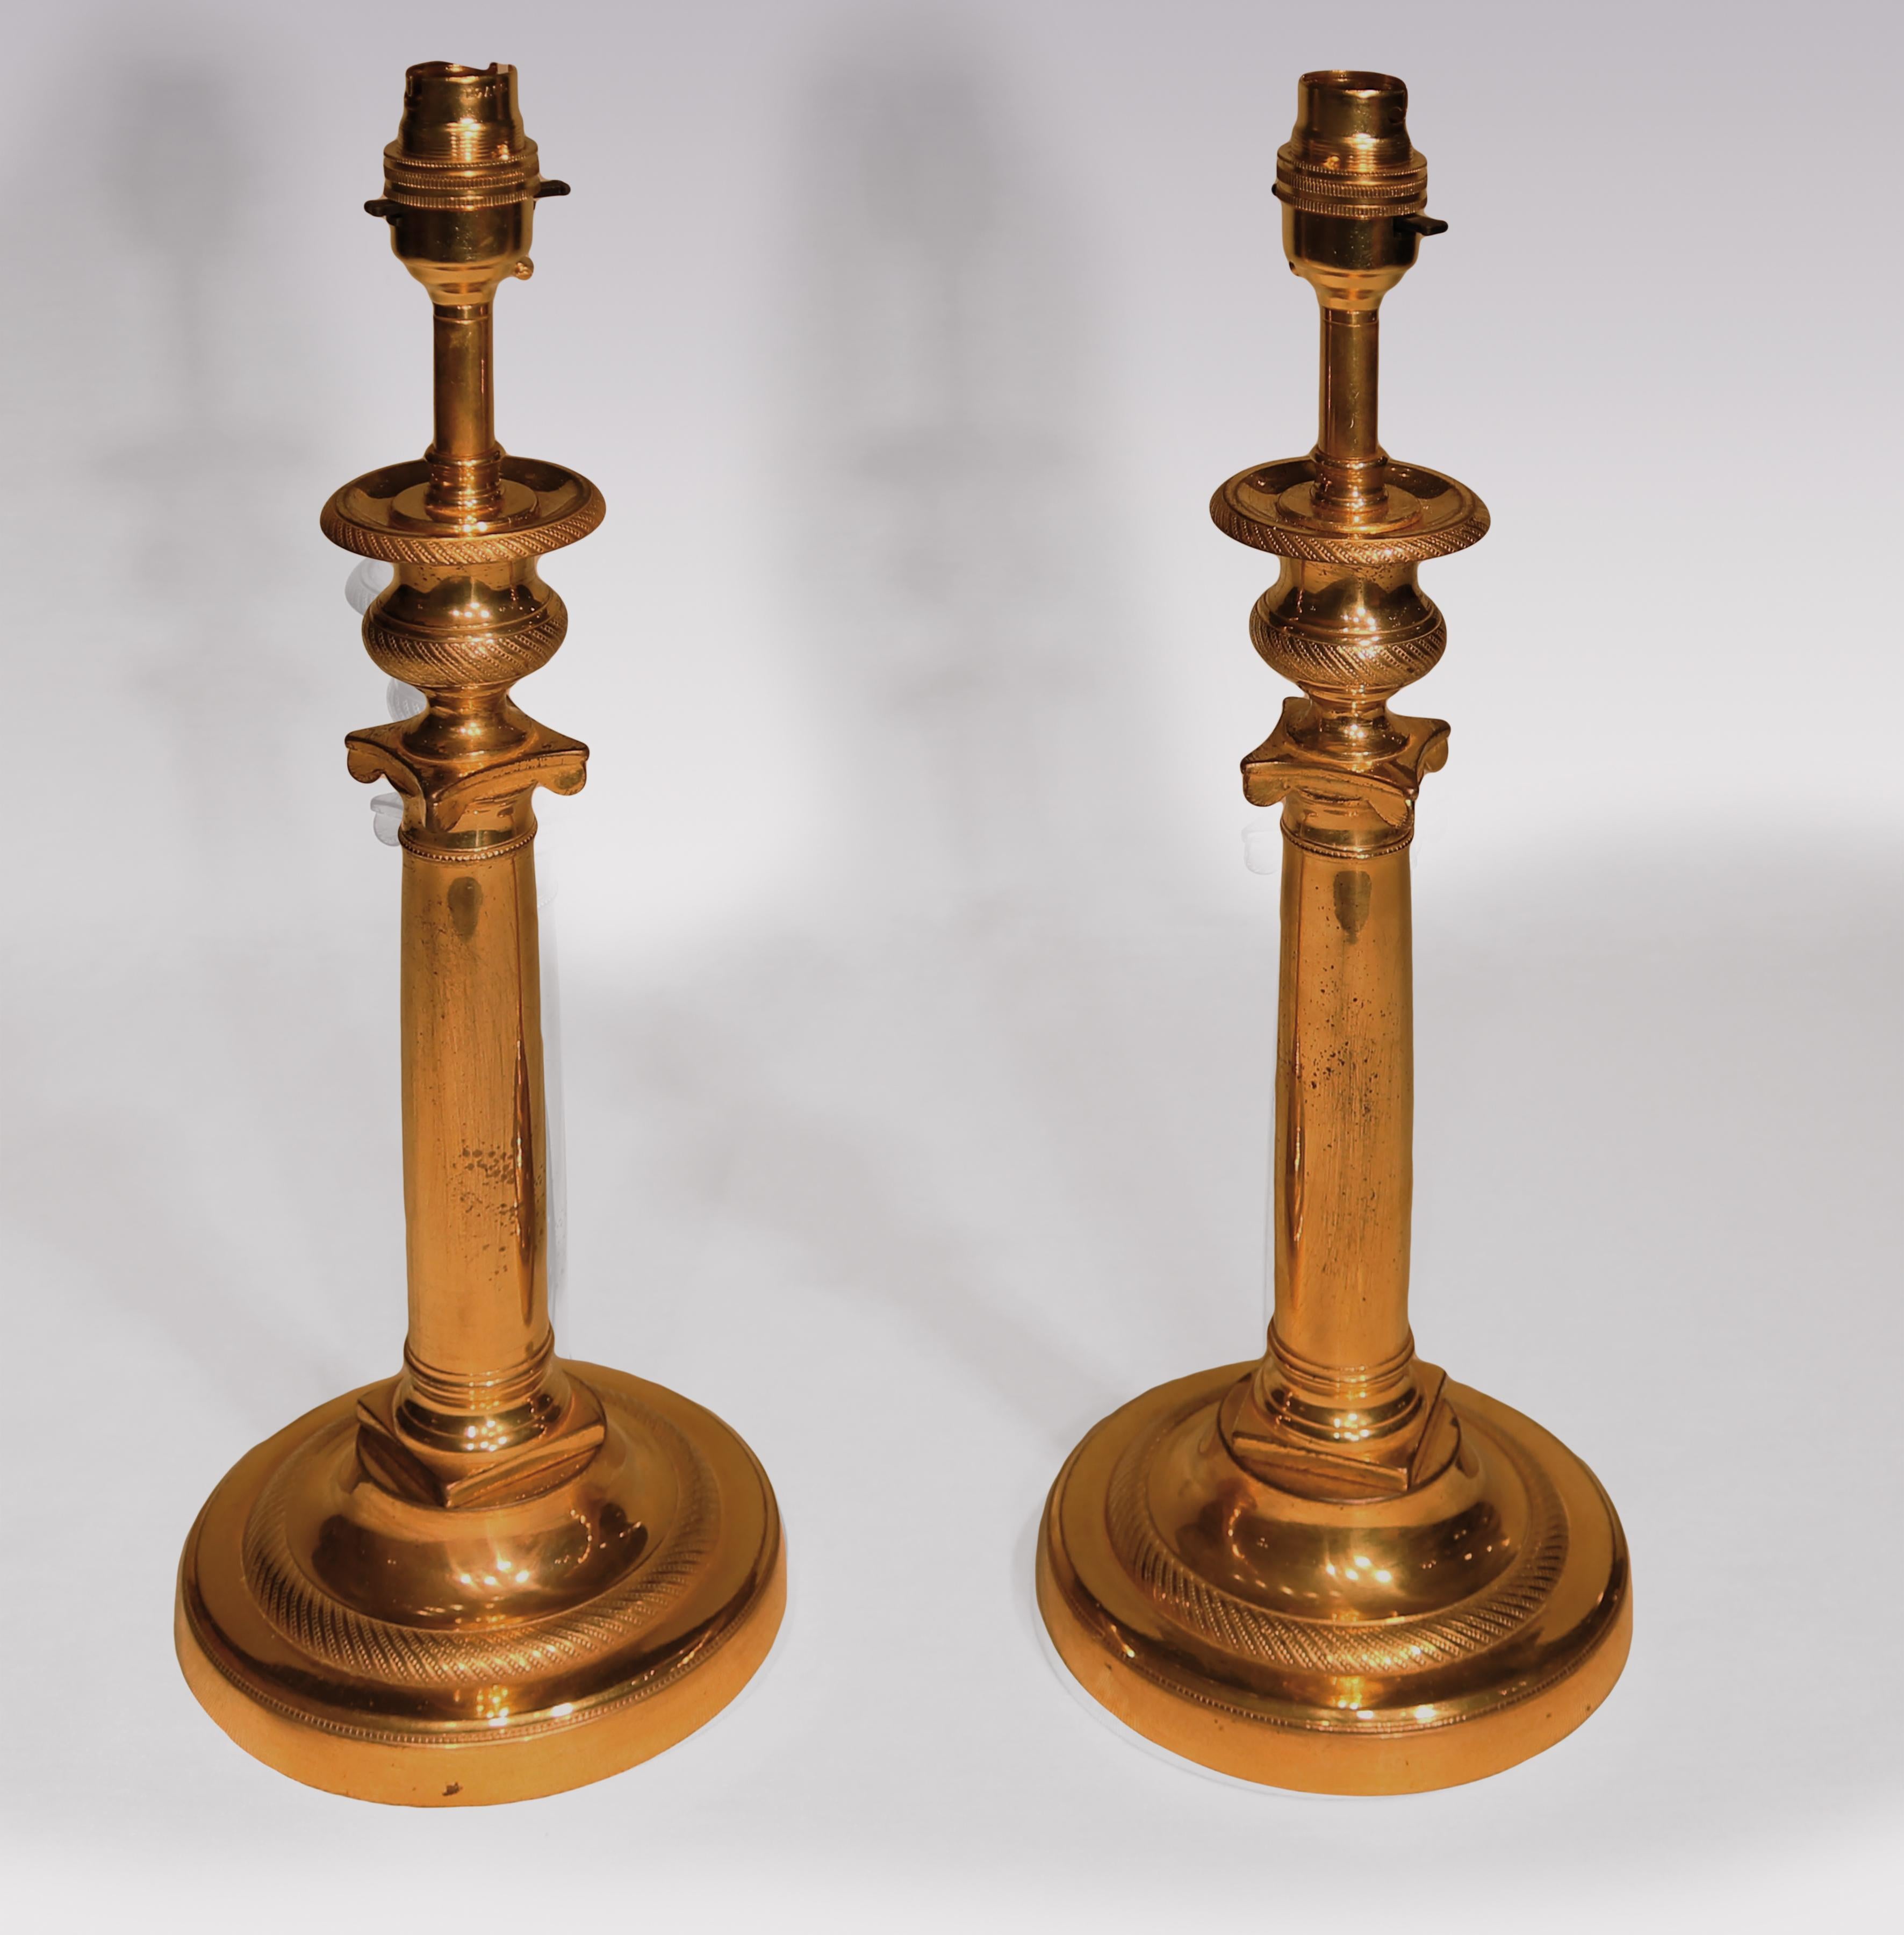 A pair of early 19th century French ormolu candlesticks having engine-turned vase-shaped nozzles, raised on Ionic capital columns supported on engine-turned circular plinth bases.
(Now converted to lamps).